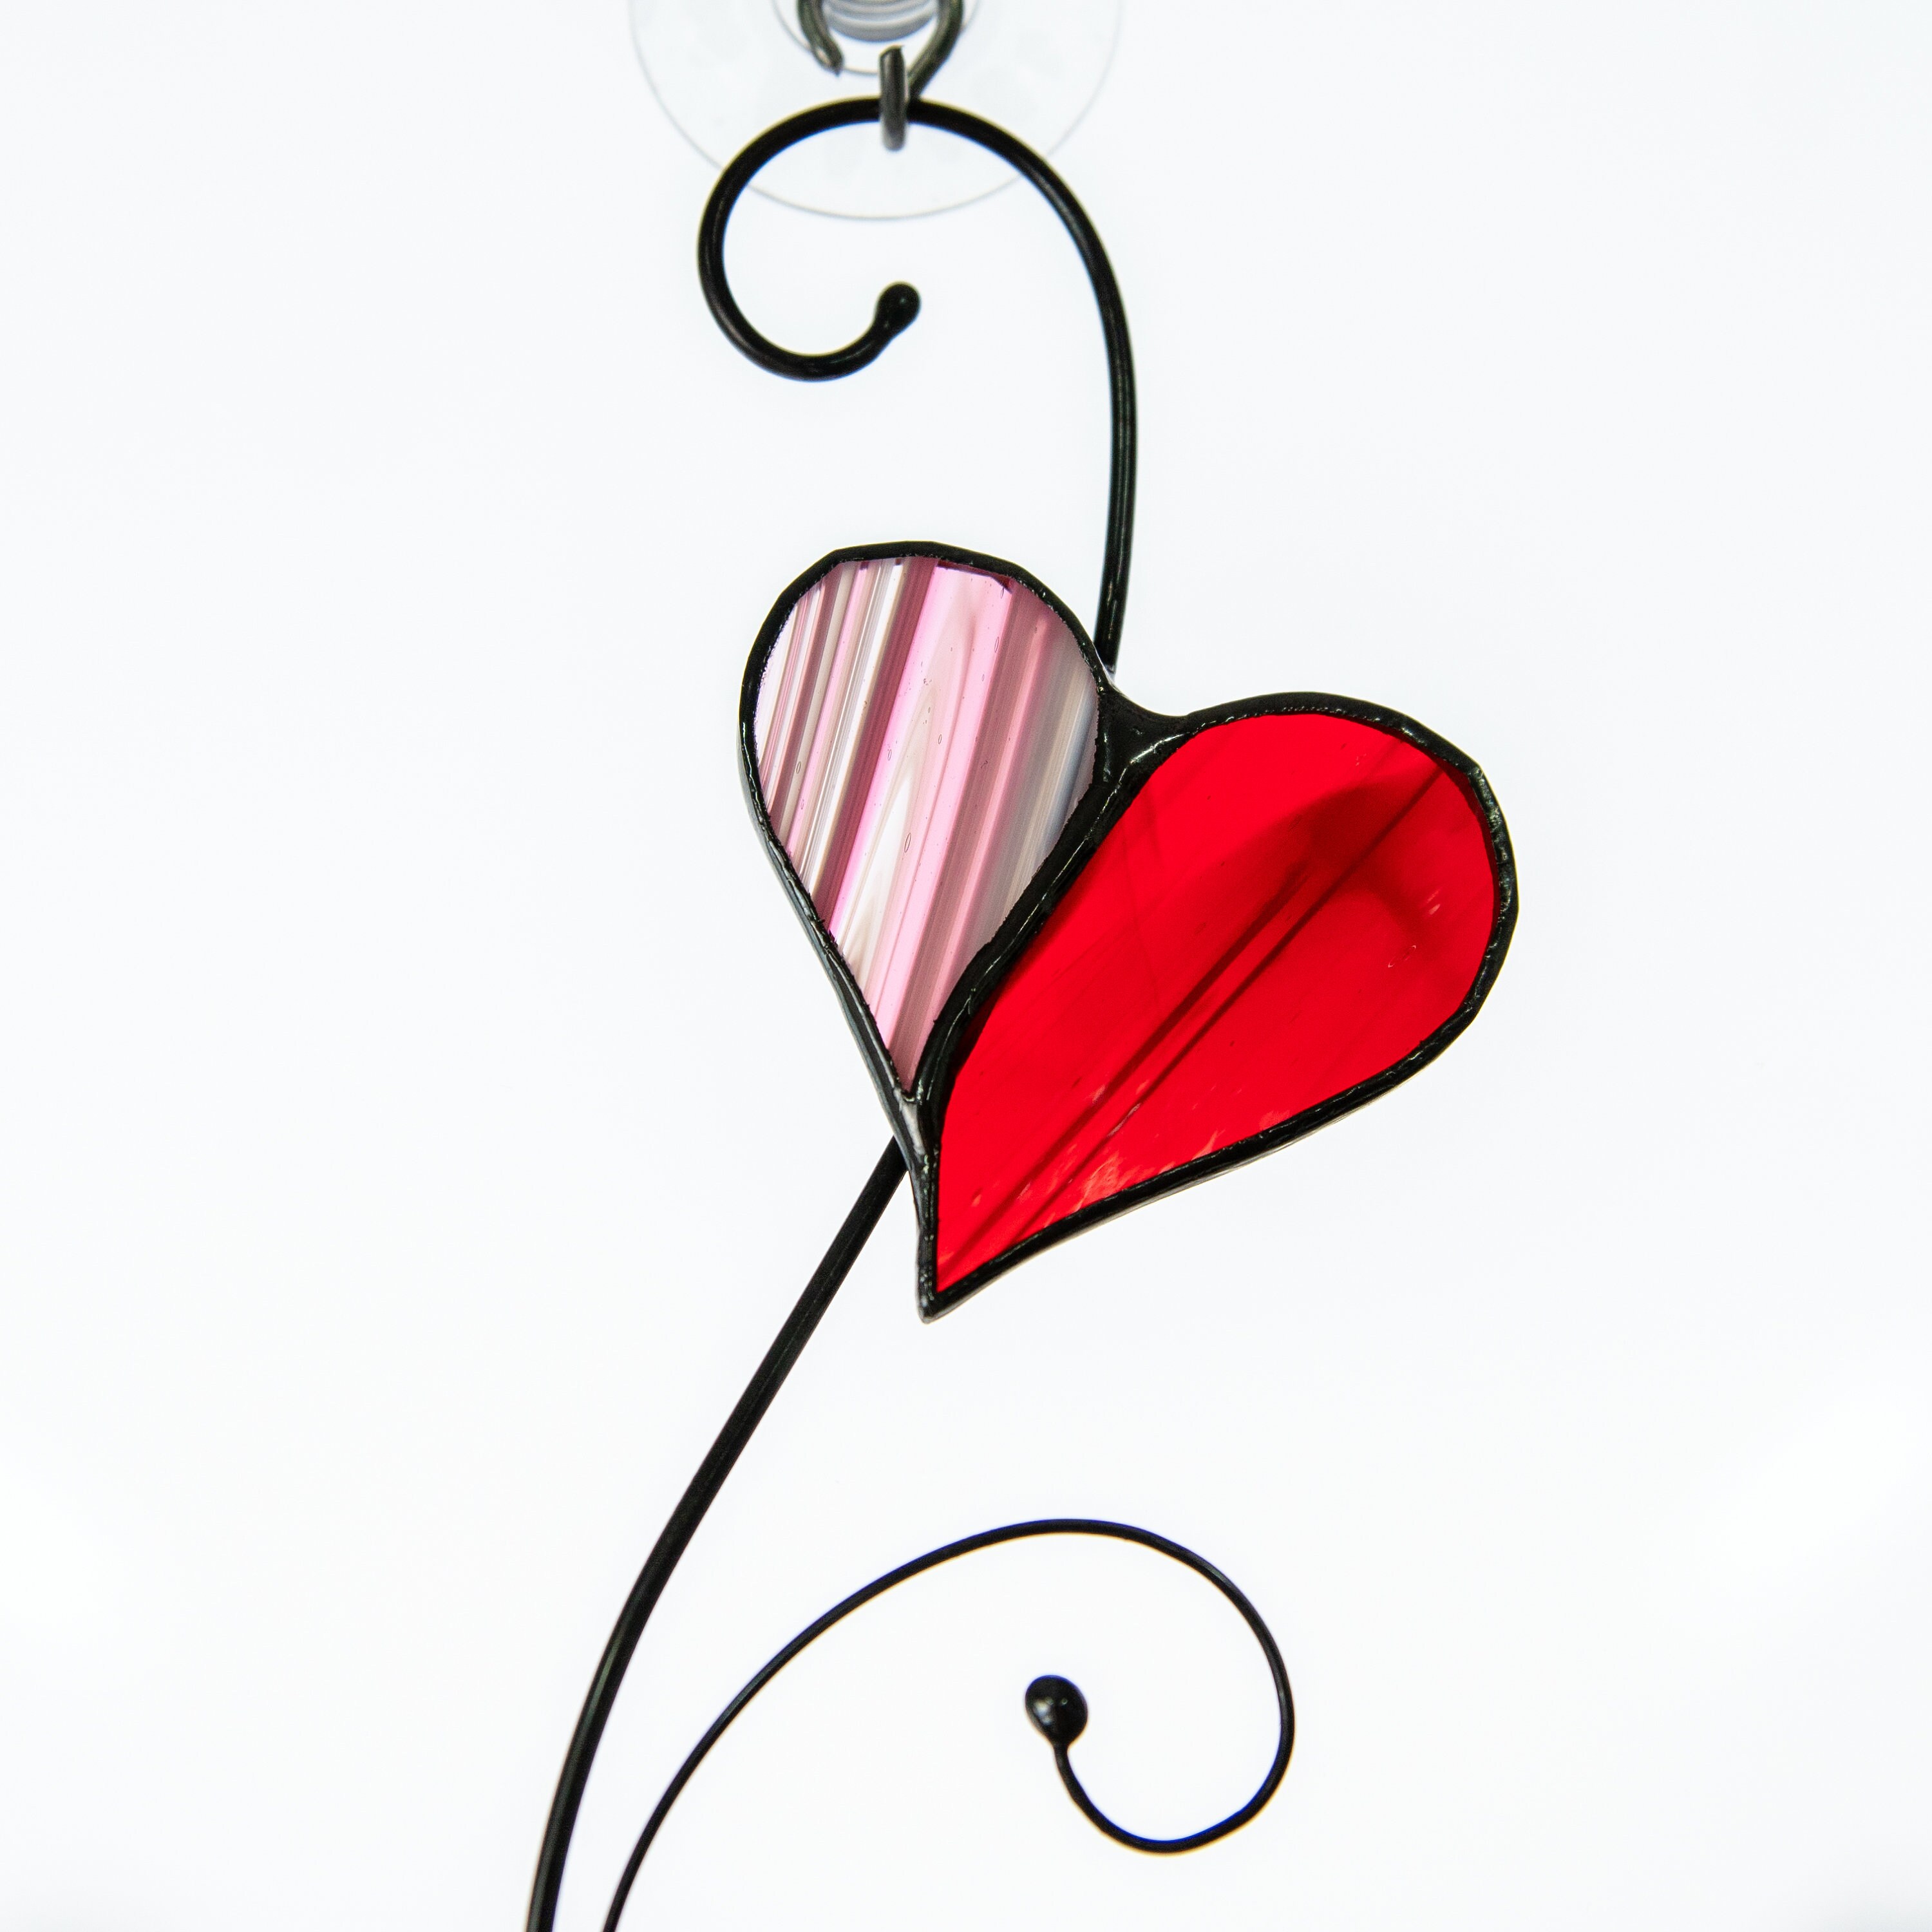 Stained Glass Heart Suncatcher, Unity Heart, Red Glass Heart, Valentines  Day Gift, Heart Ornament, Anniversary Gift, Girlfriend Gift 